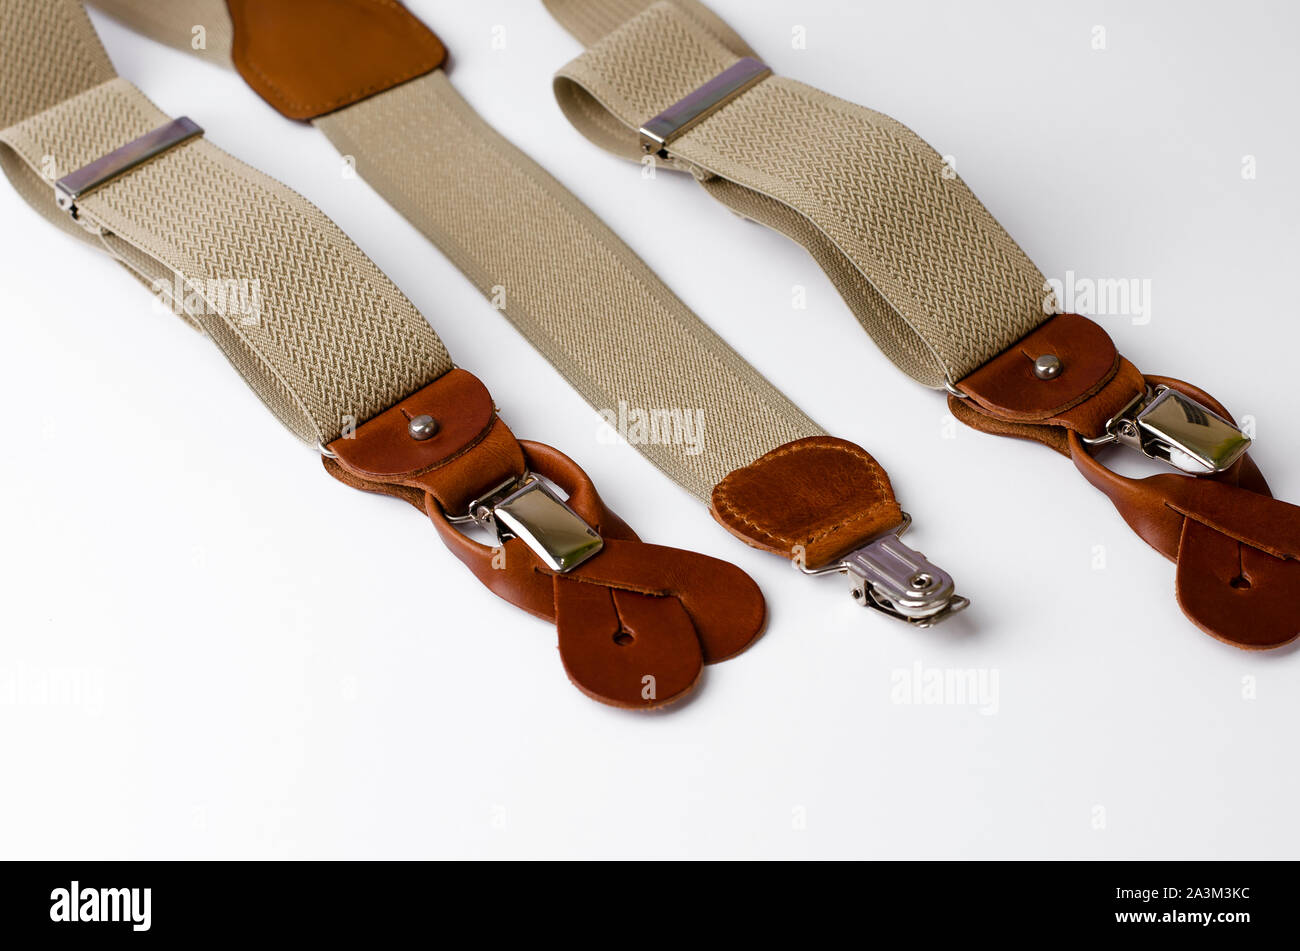 Close-up on Leather details of suspenders on white background. Men's accessories concept Stock Photo